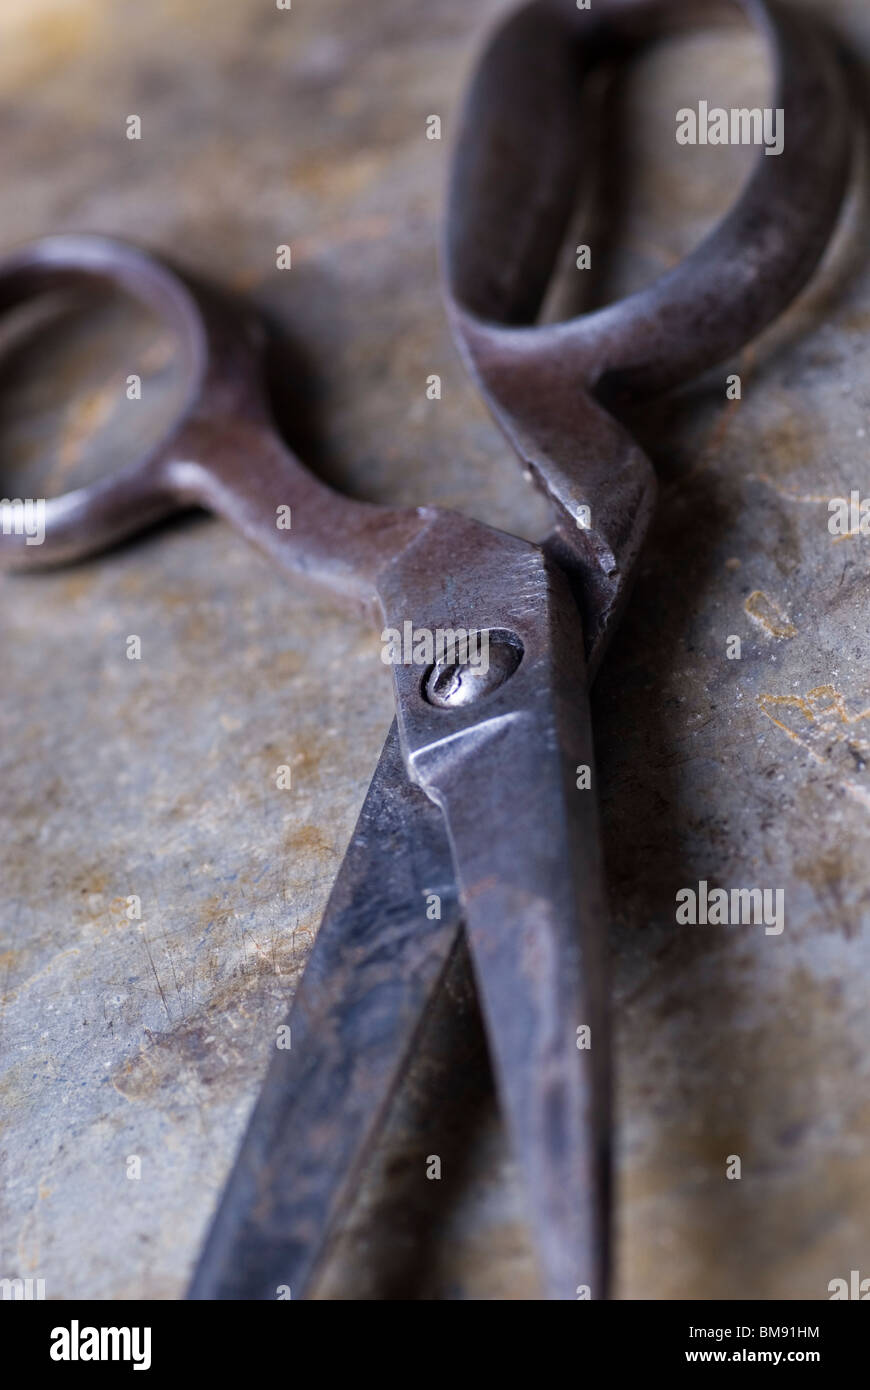 Old rusted tailor's scissors Stock Photo